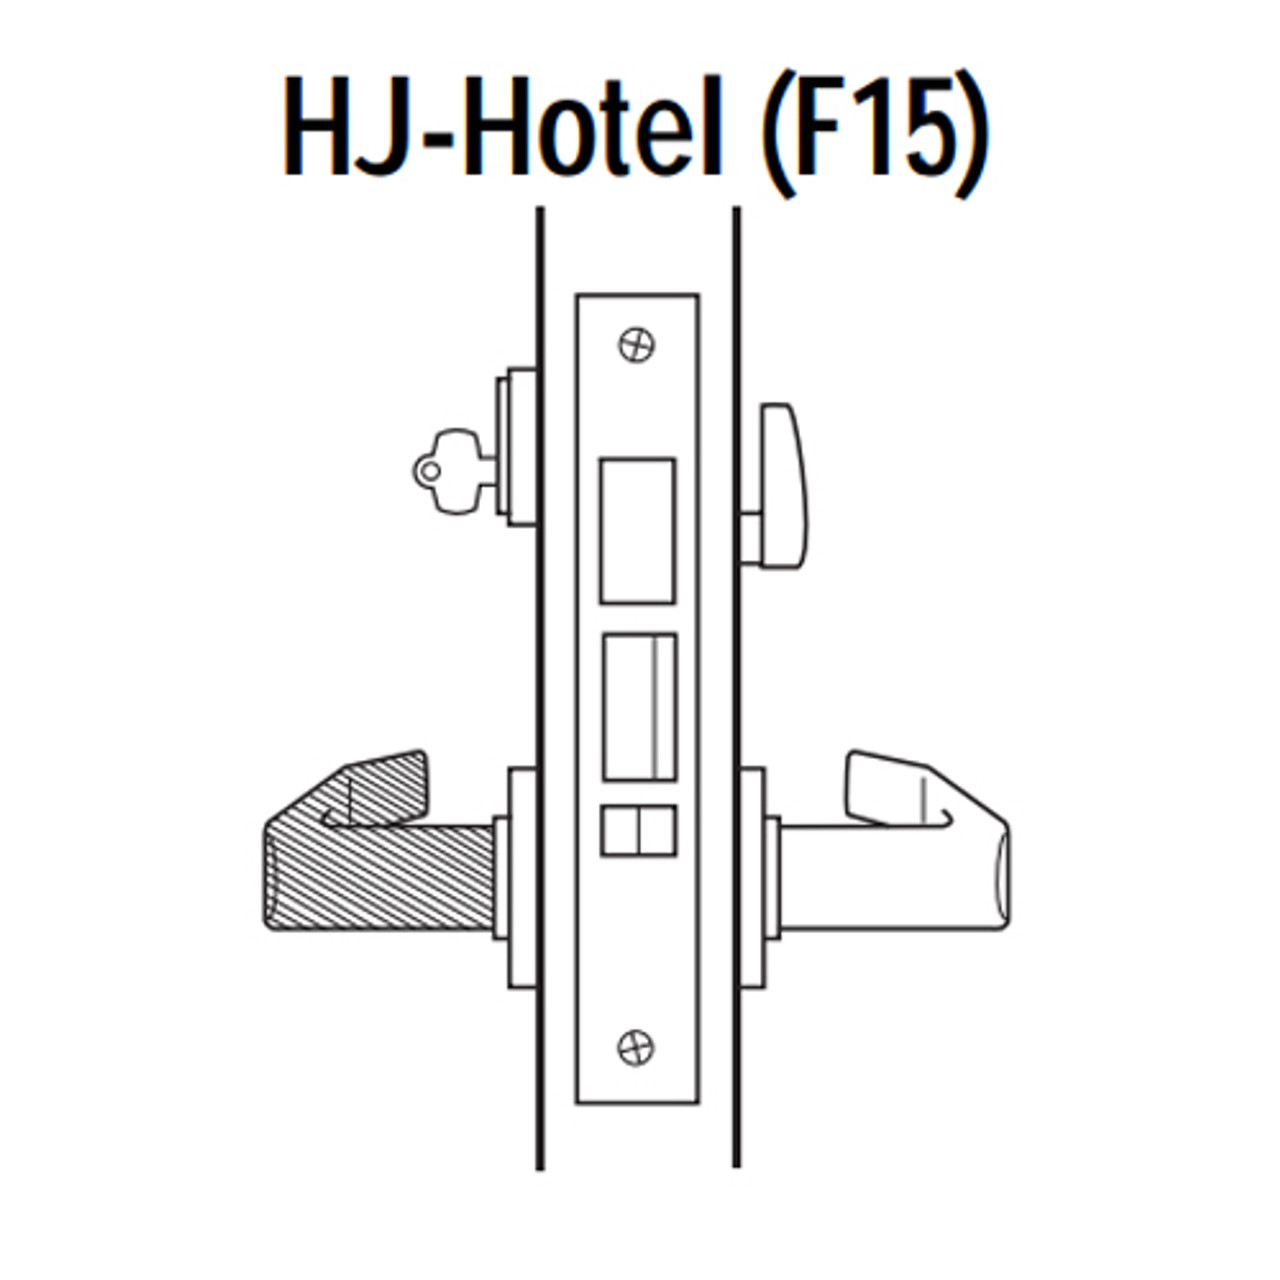 45H7HJ16S690 Best 40H Series Hotel with Deadbolt Heavy Duty Mortise Lever Lock with Curved with No Return in Dark Bronze